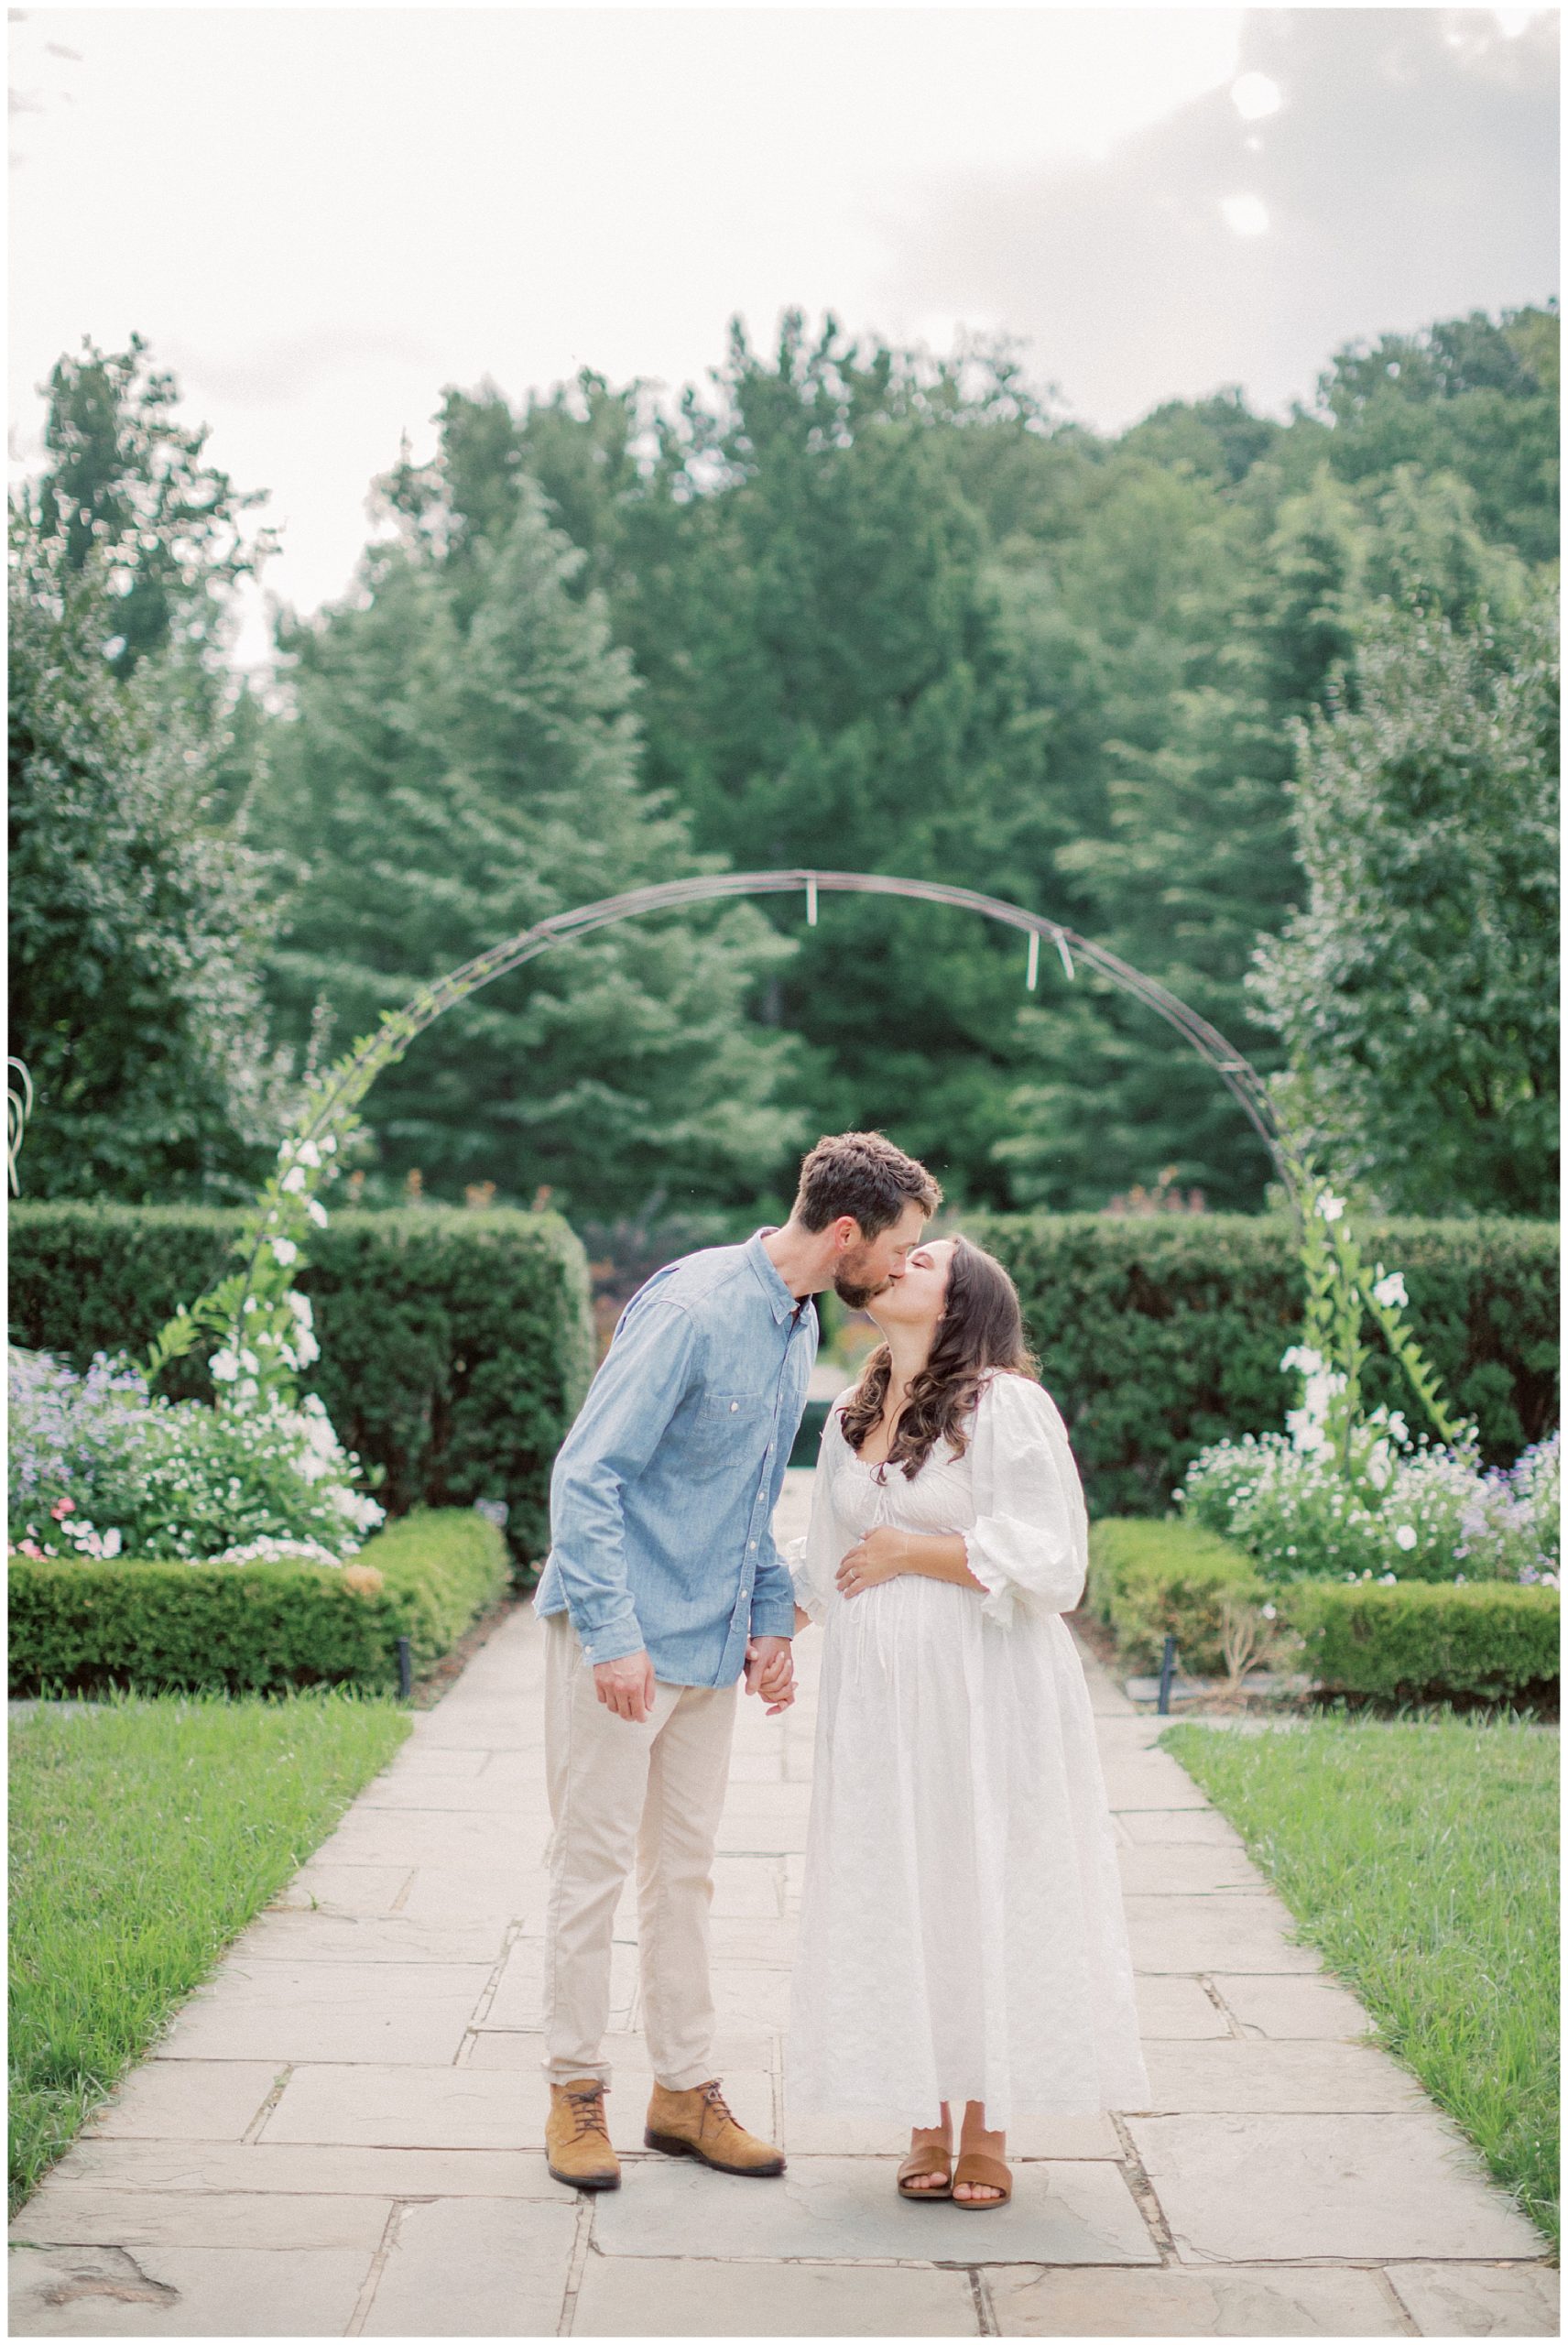 Couple stand together, holding hands and leaning in for a kiss, during their garden maternity session at Brookside Gardens.